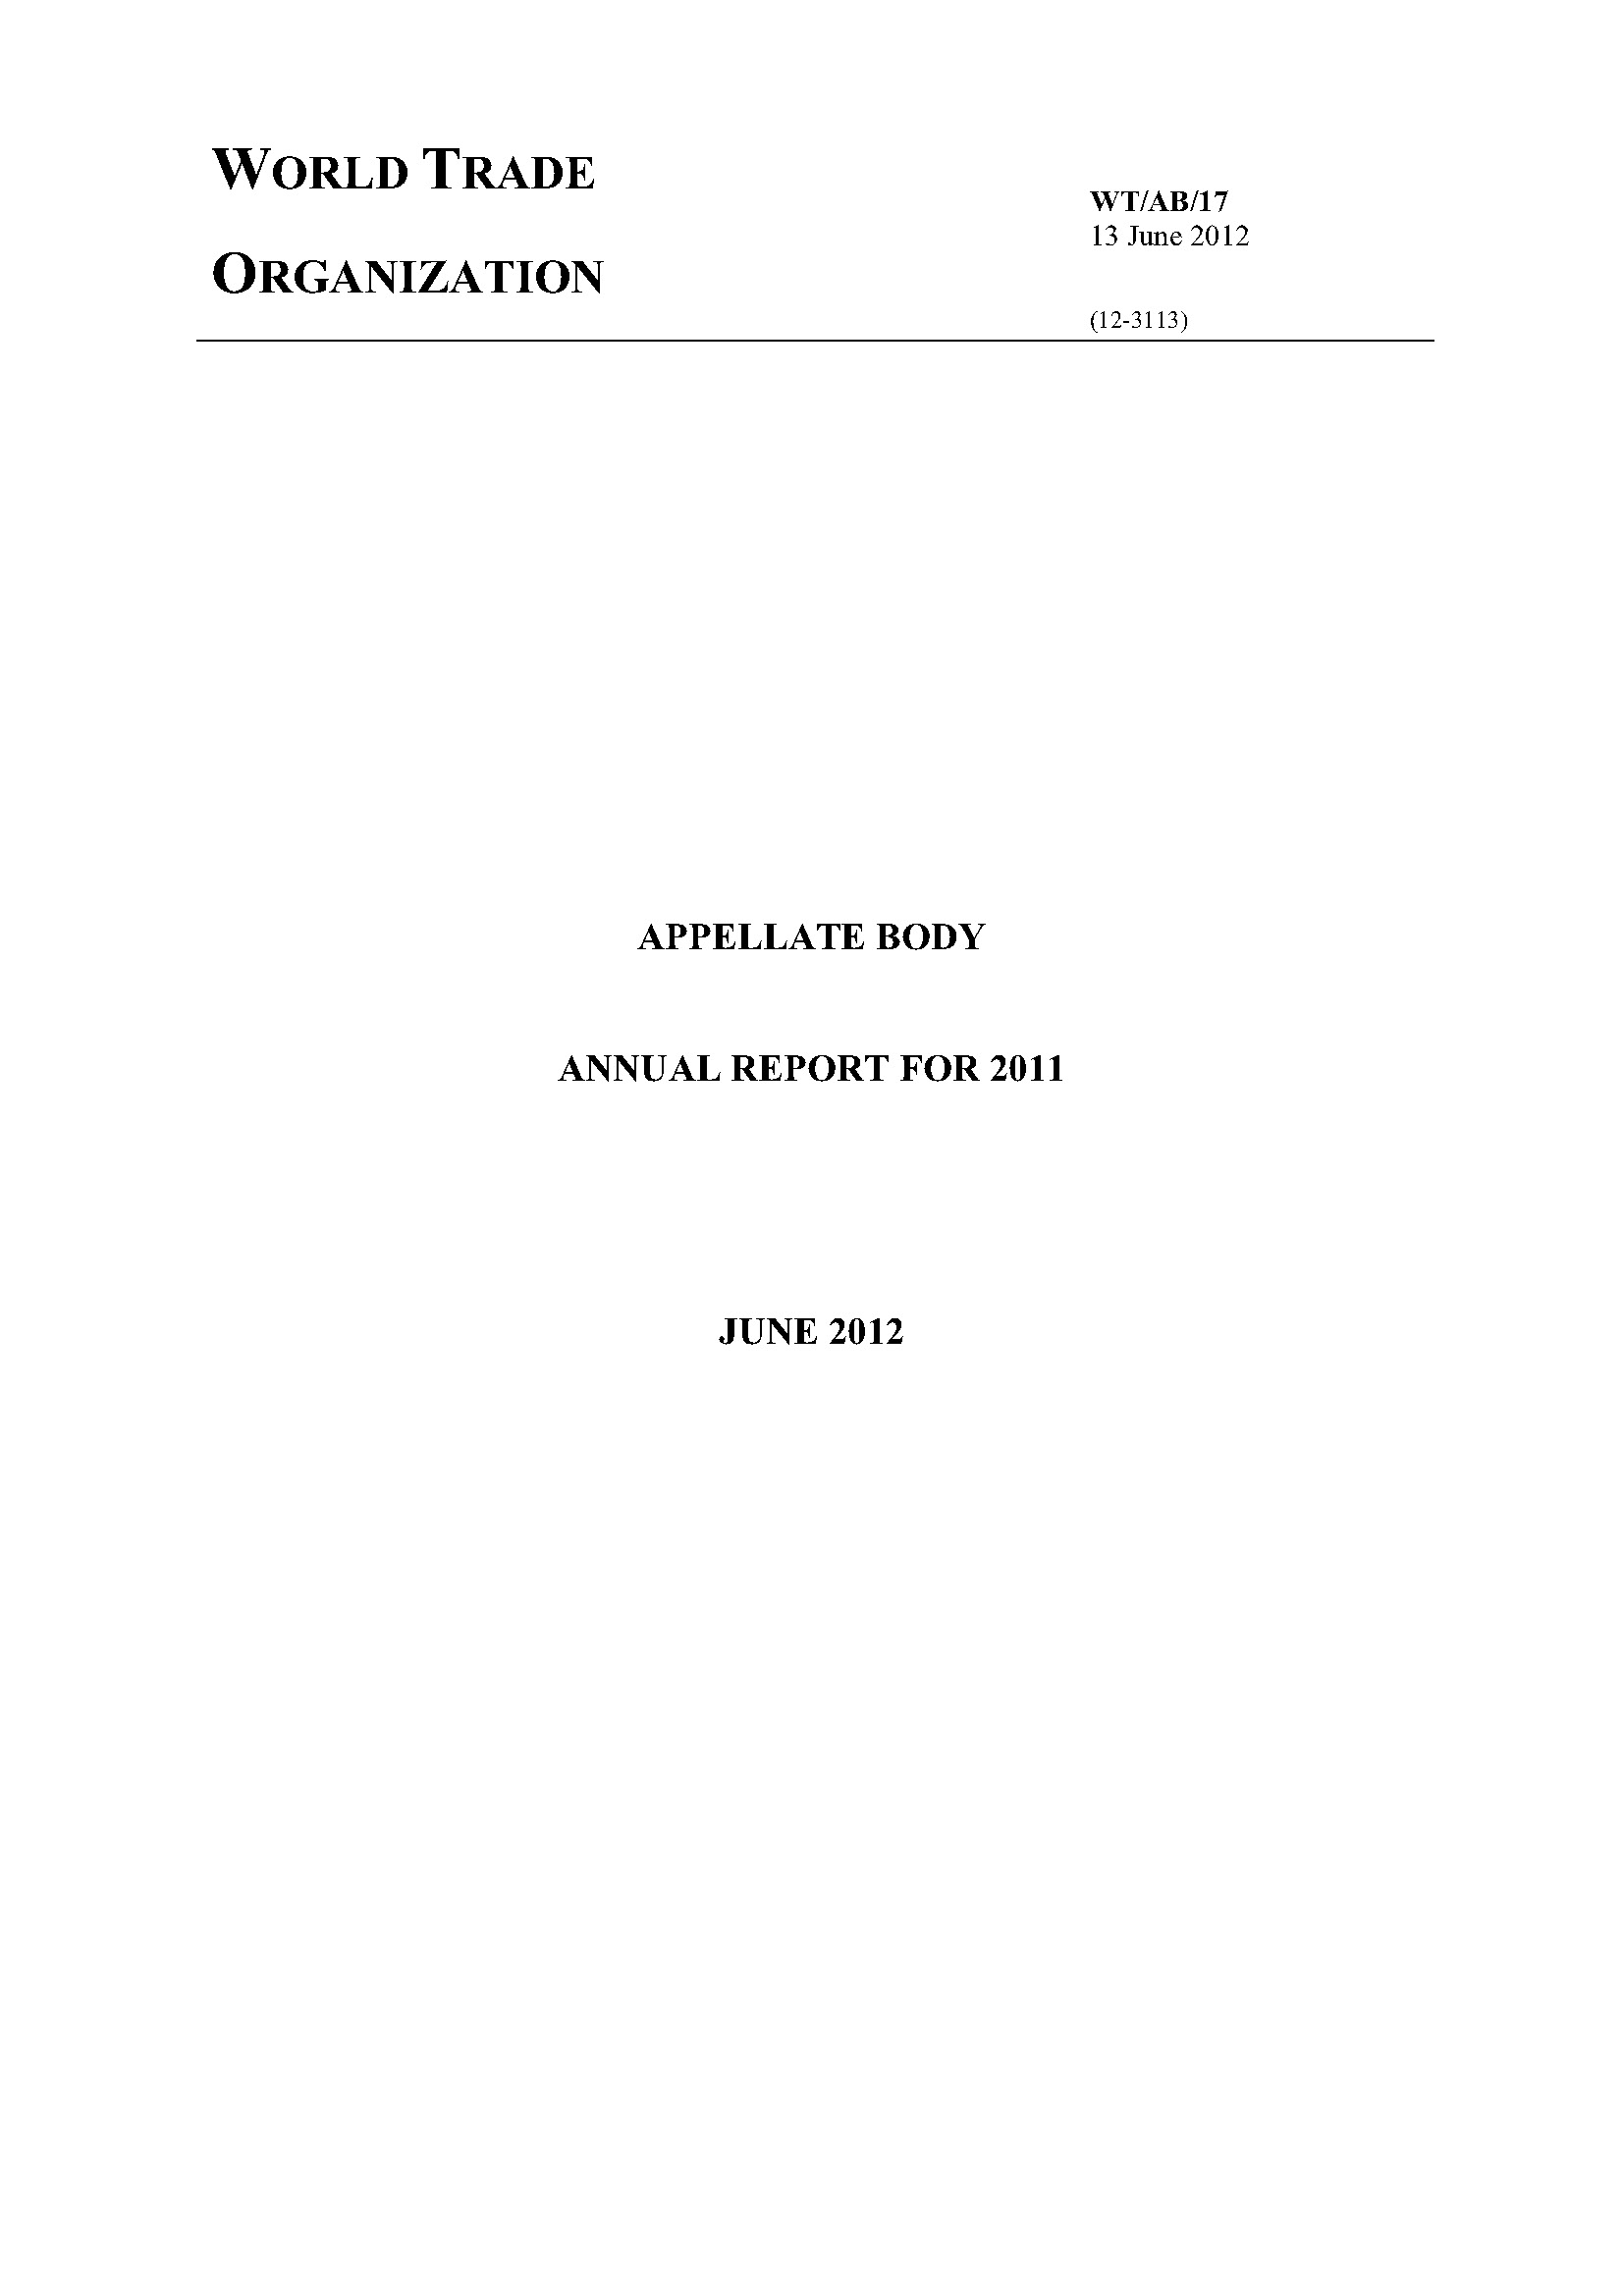 image of Appellate Body annual report for 2011